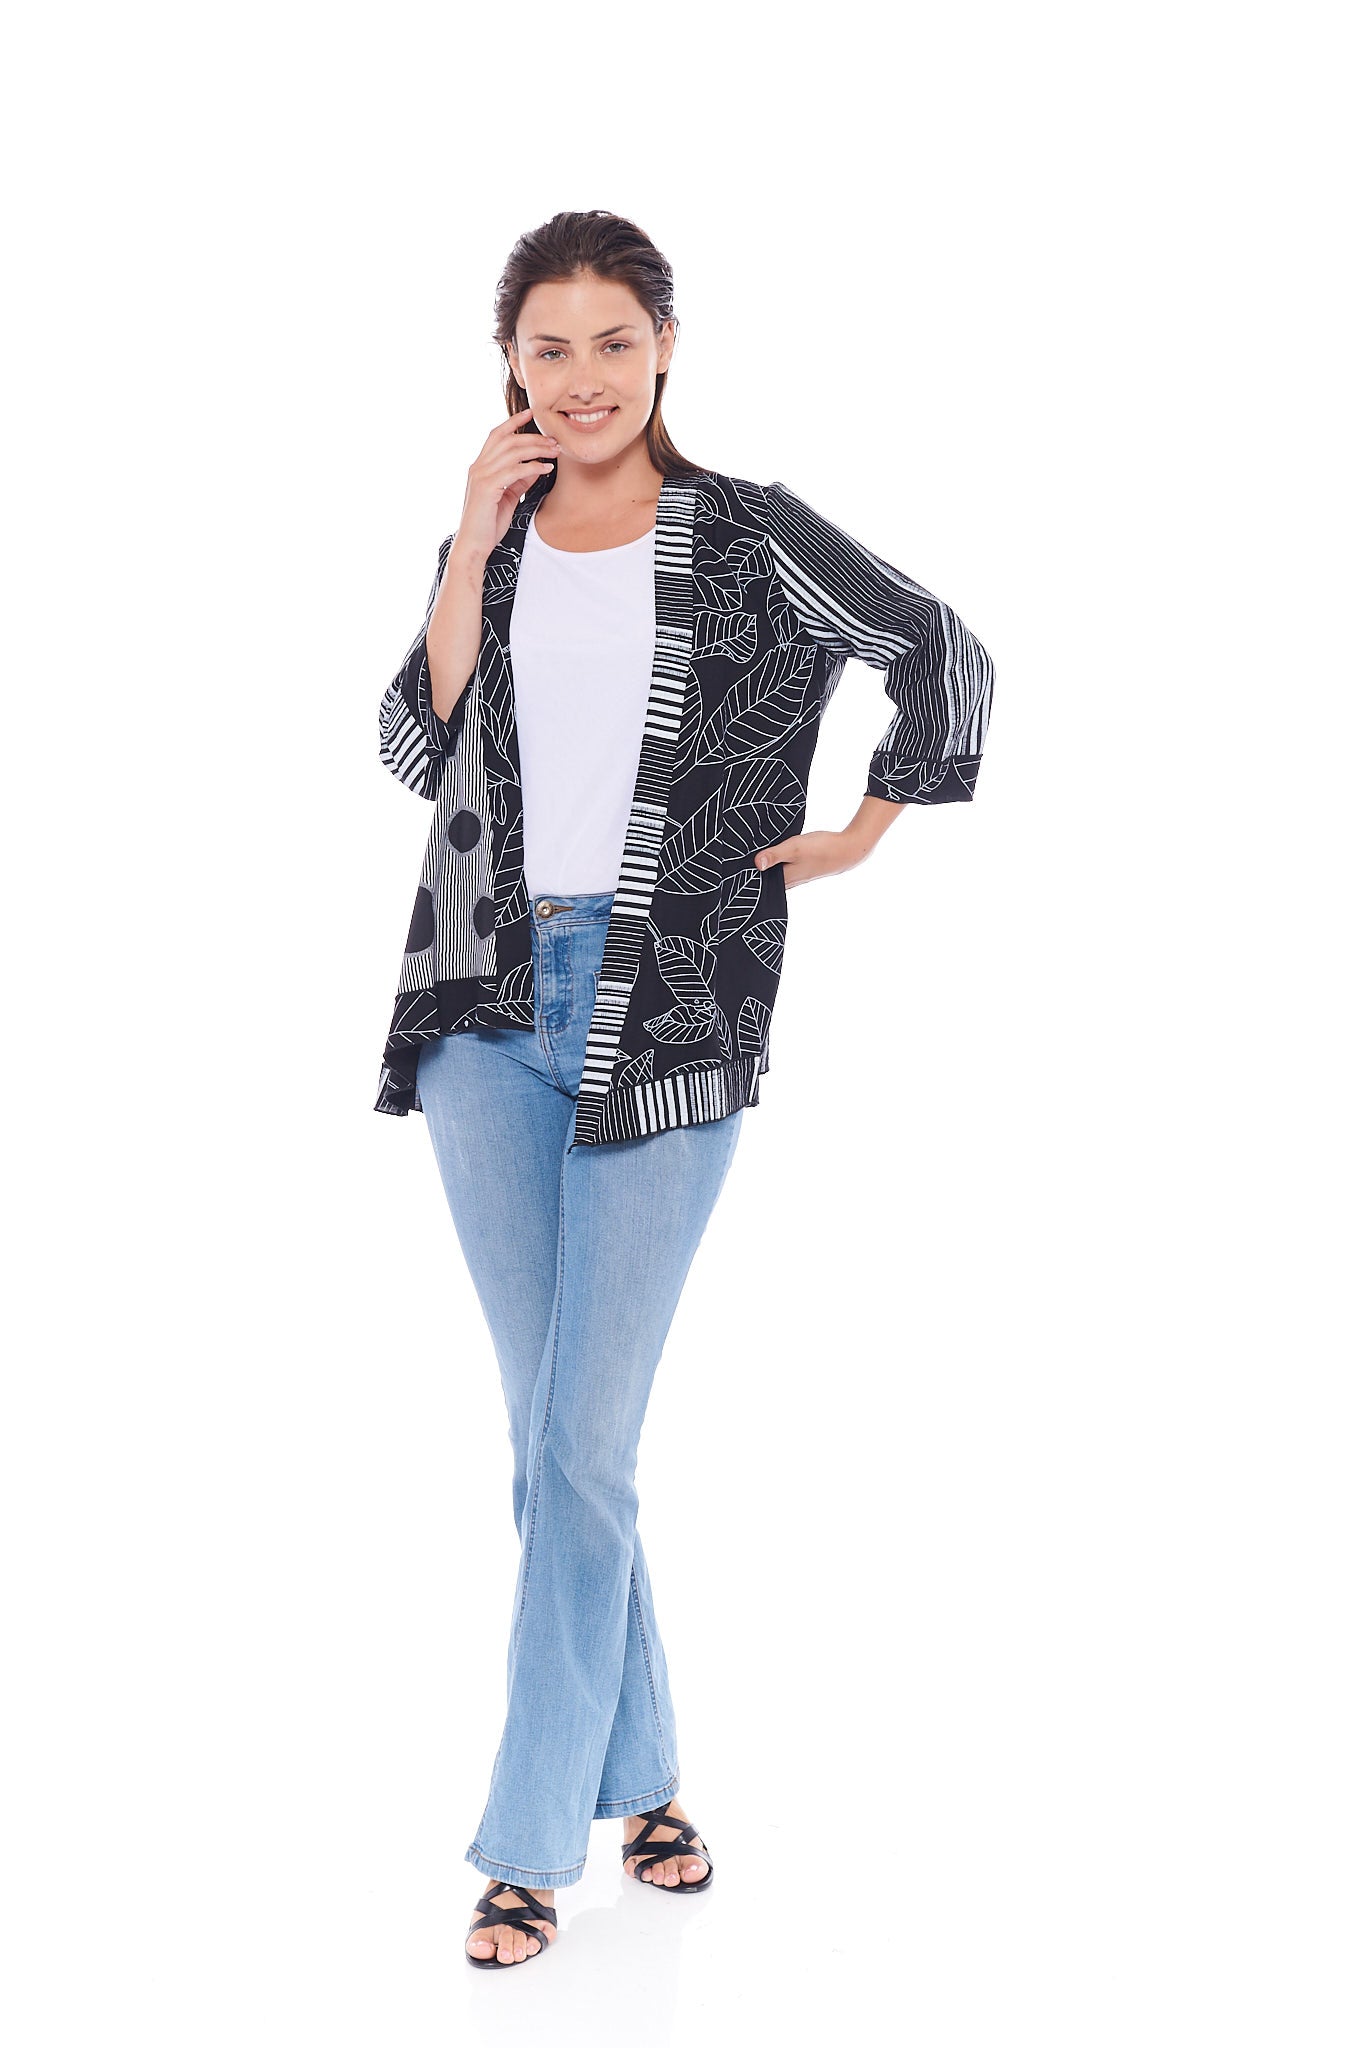 THE GIRLS DAY OUT JACKET IN BLOCK BLACK